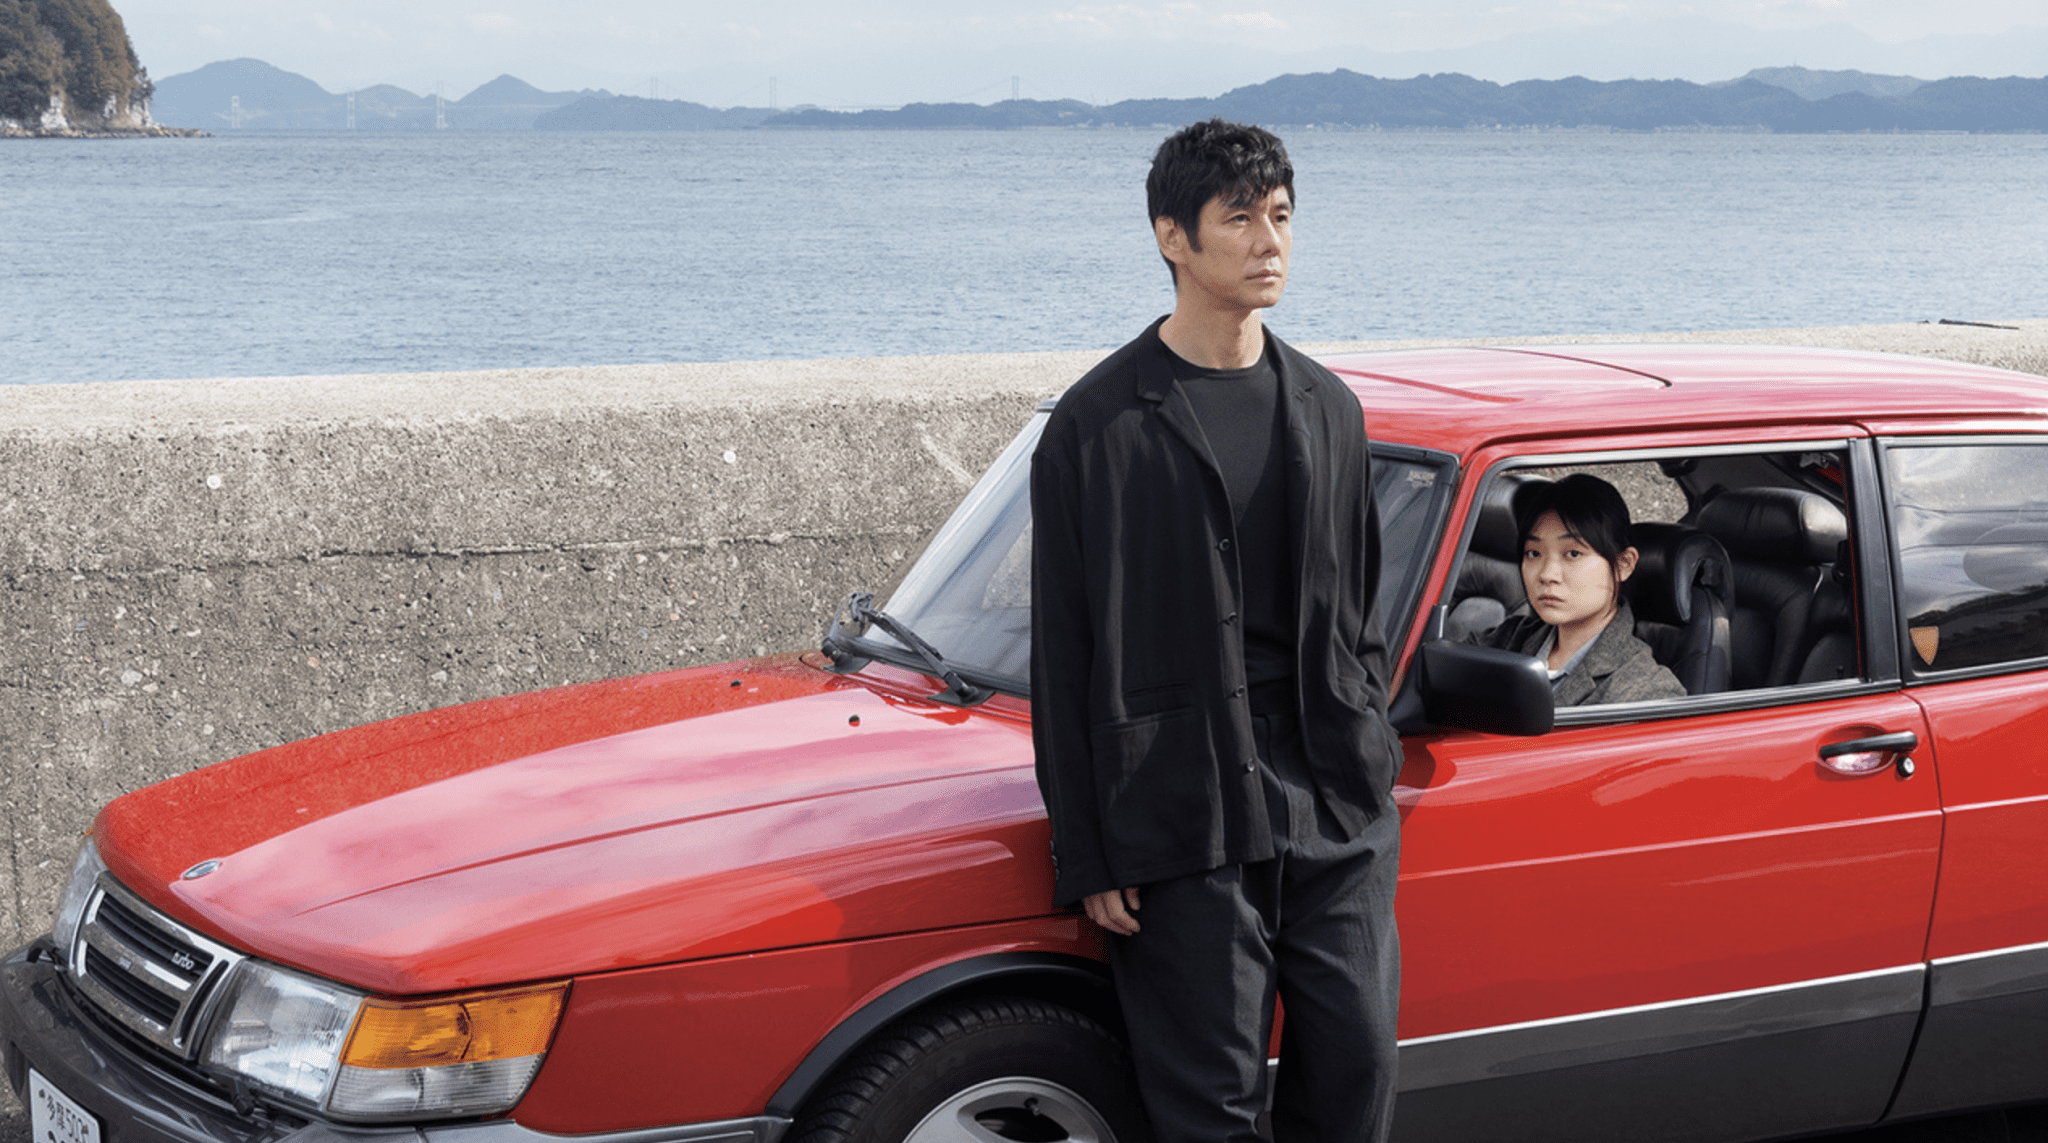 Hidetoshi Nishijima in Drive My Car leans against a red Saab staring pensively into the distance. A female driver sits in the front seat looking at the camera. The background is of the Japanese coastline with faint mountains in the distance.